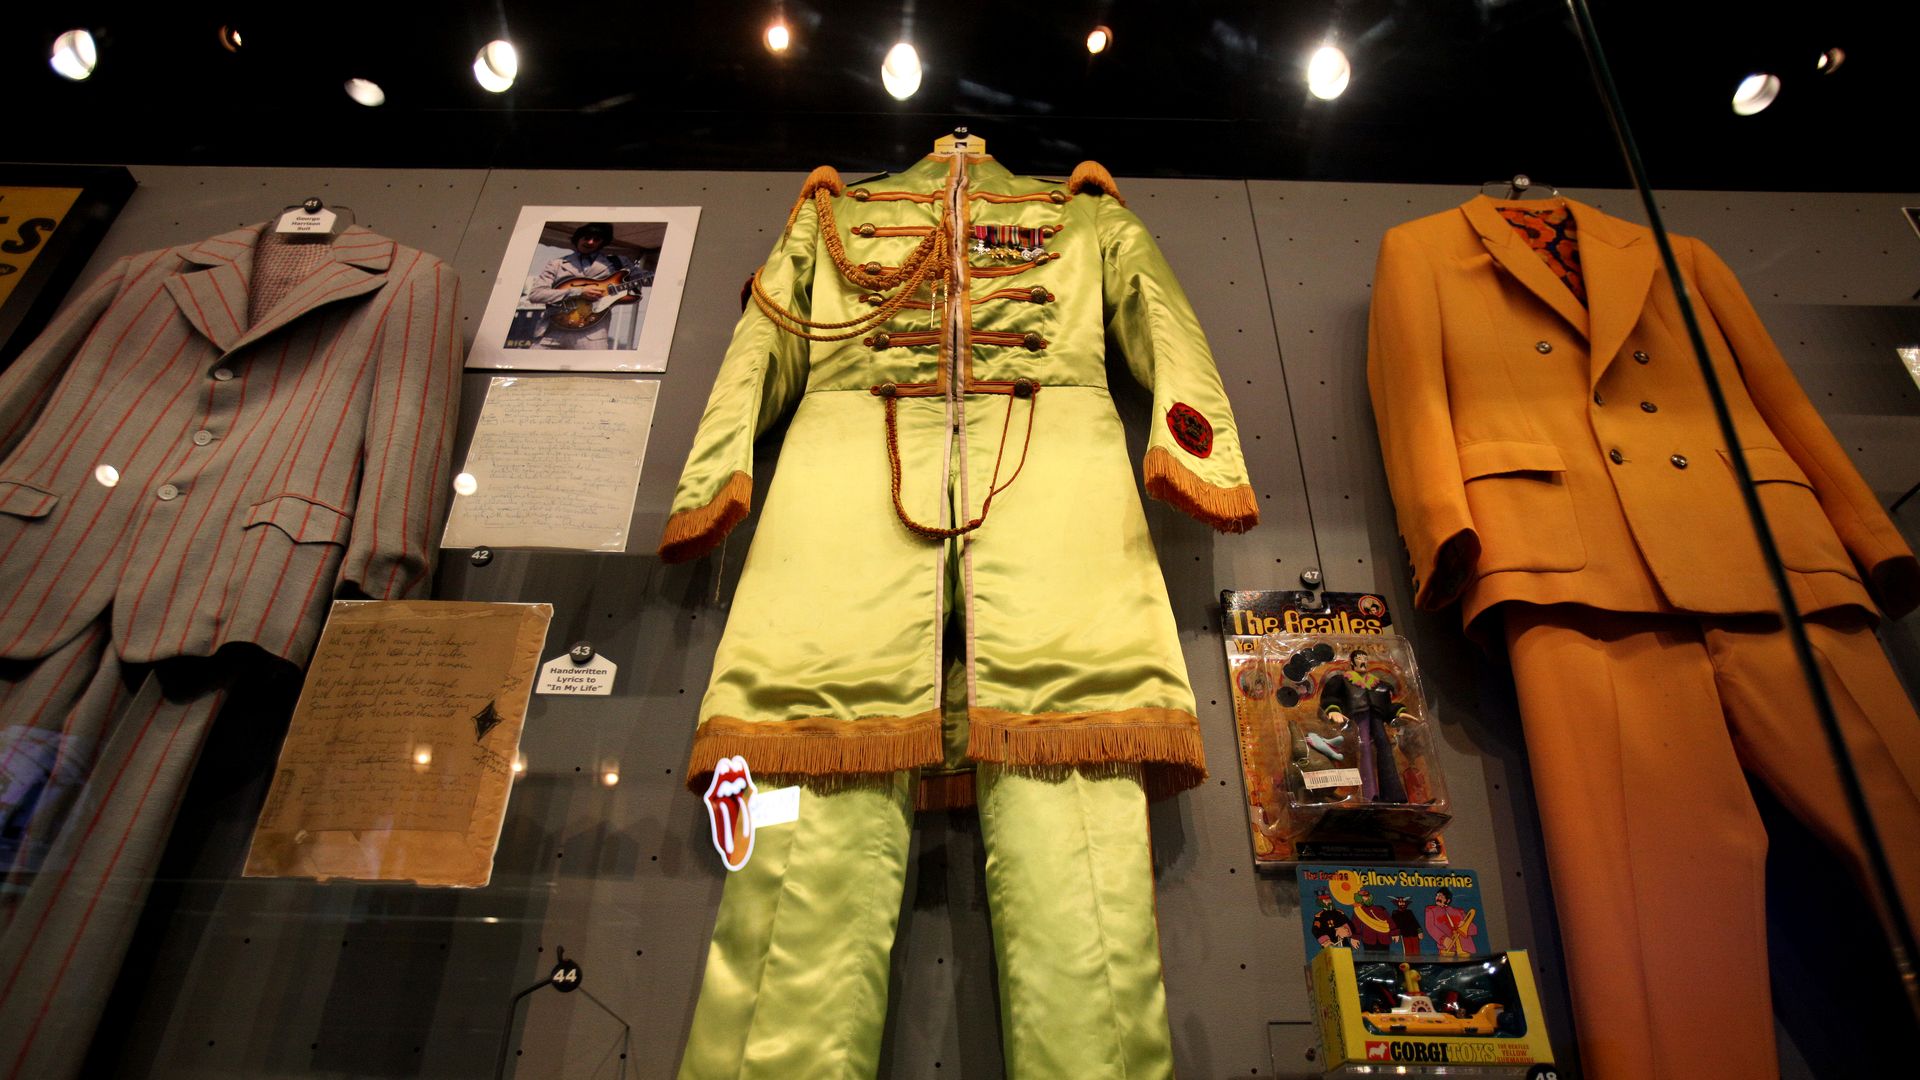 John Lennon's lime green "Sgt. Pepper's Lonely Hearts Club Band" costume inside a glass case.